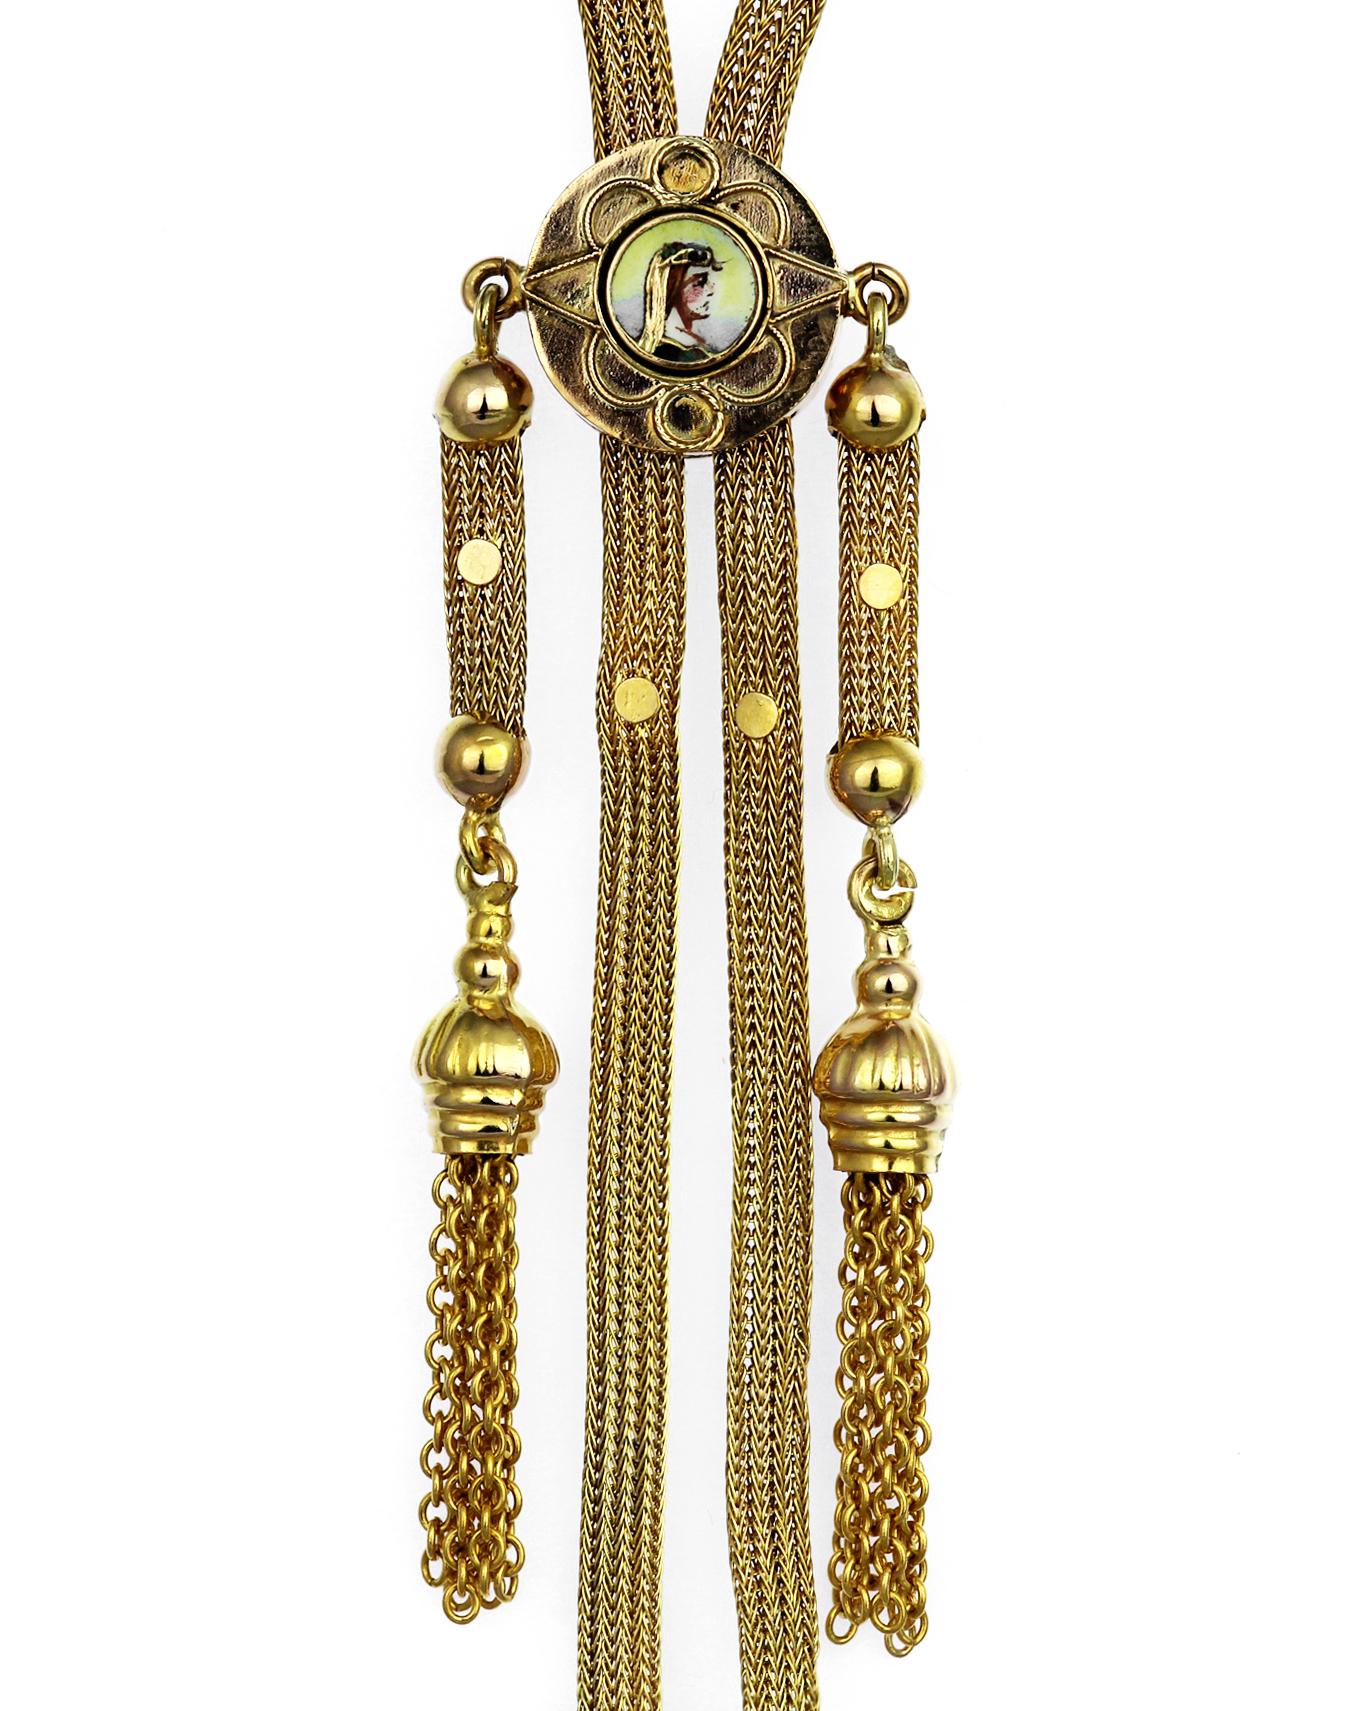 Antique 1880 12K Gold Long Chain/Necklace with Tassel Links with Enamel Panel In Fair Condition For Sale In London, GB